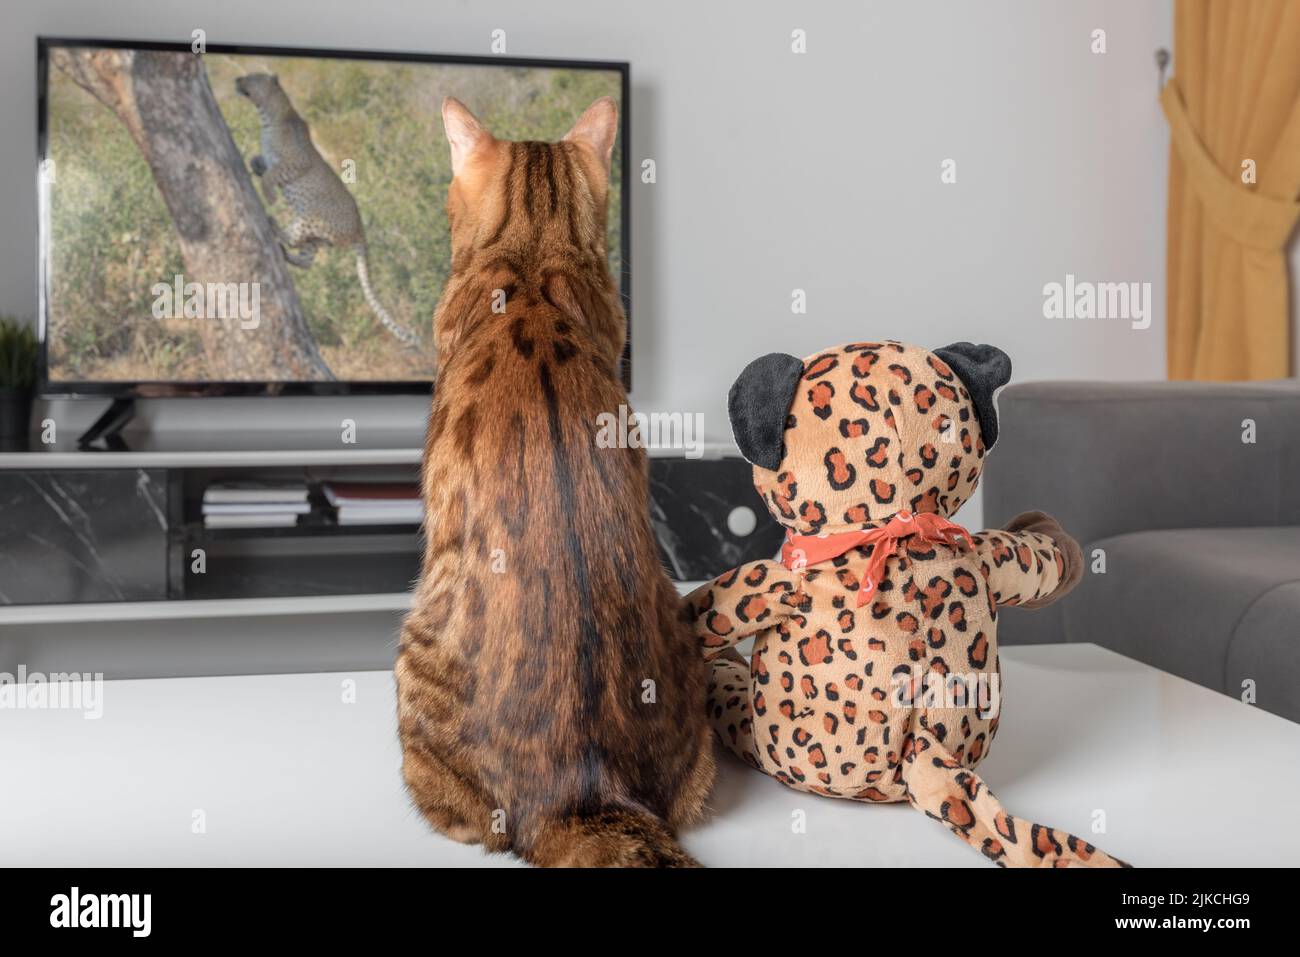 A Bengal cat and a plush toy are watching an animal program on TV. Stock Photo